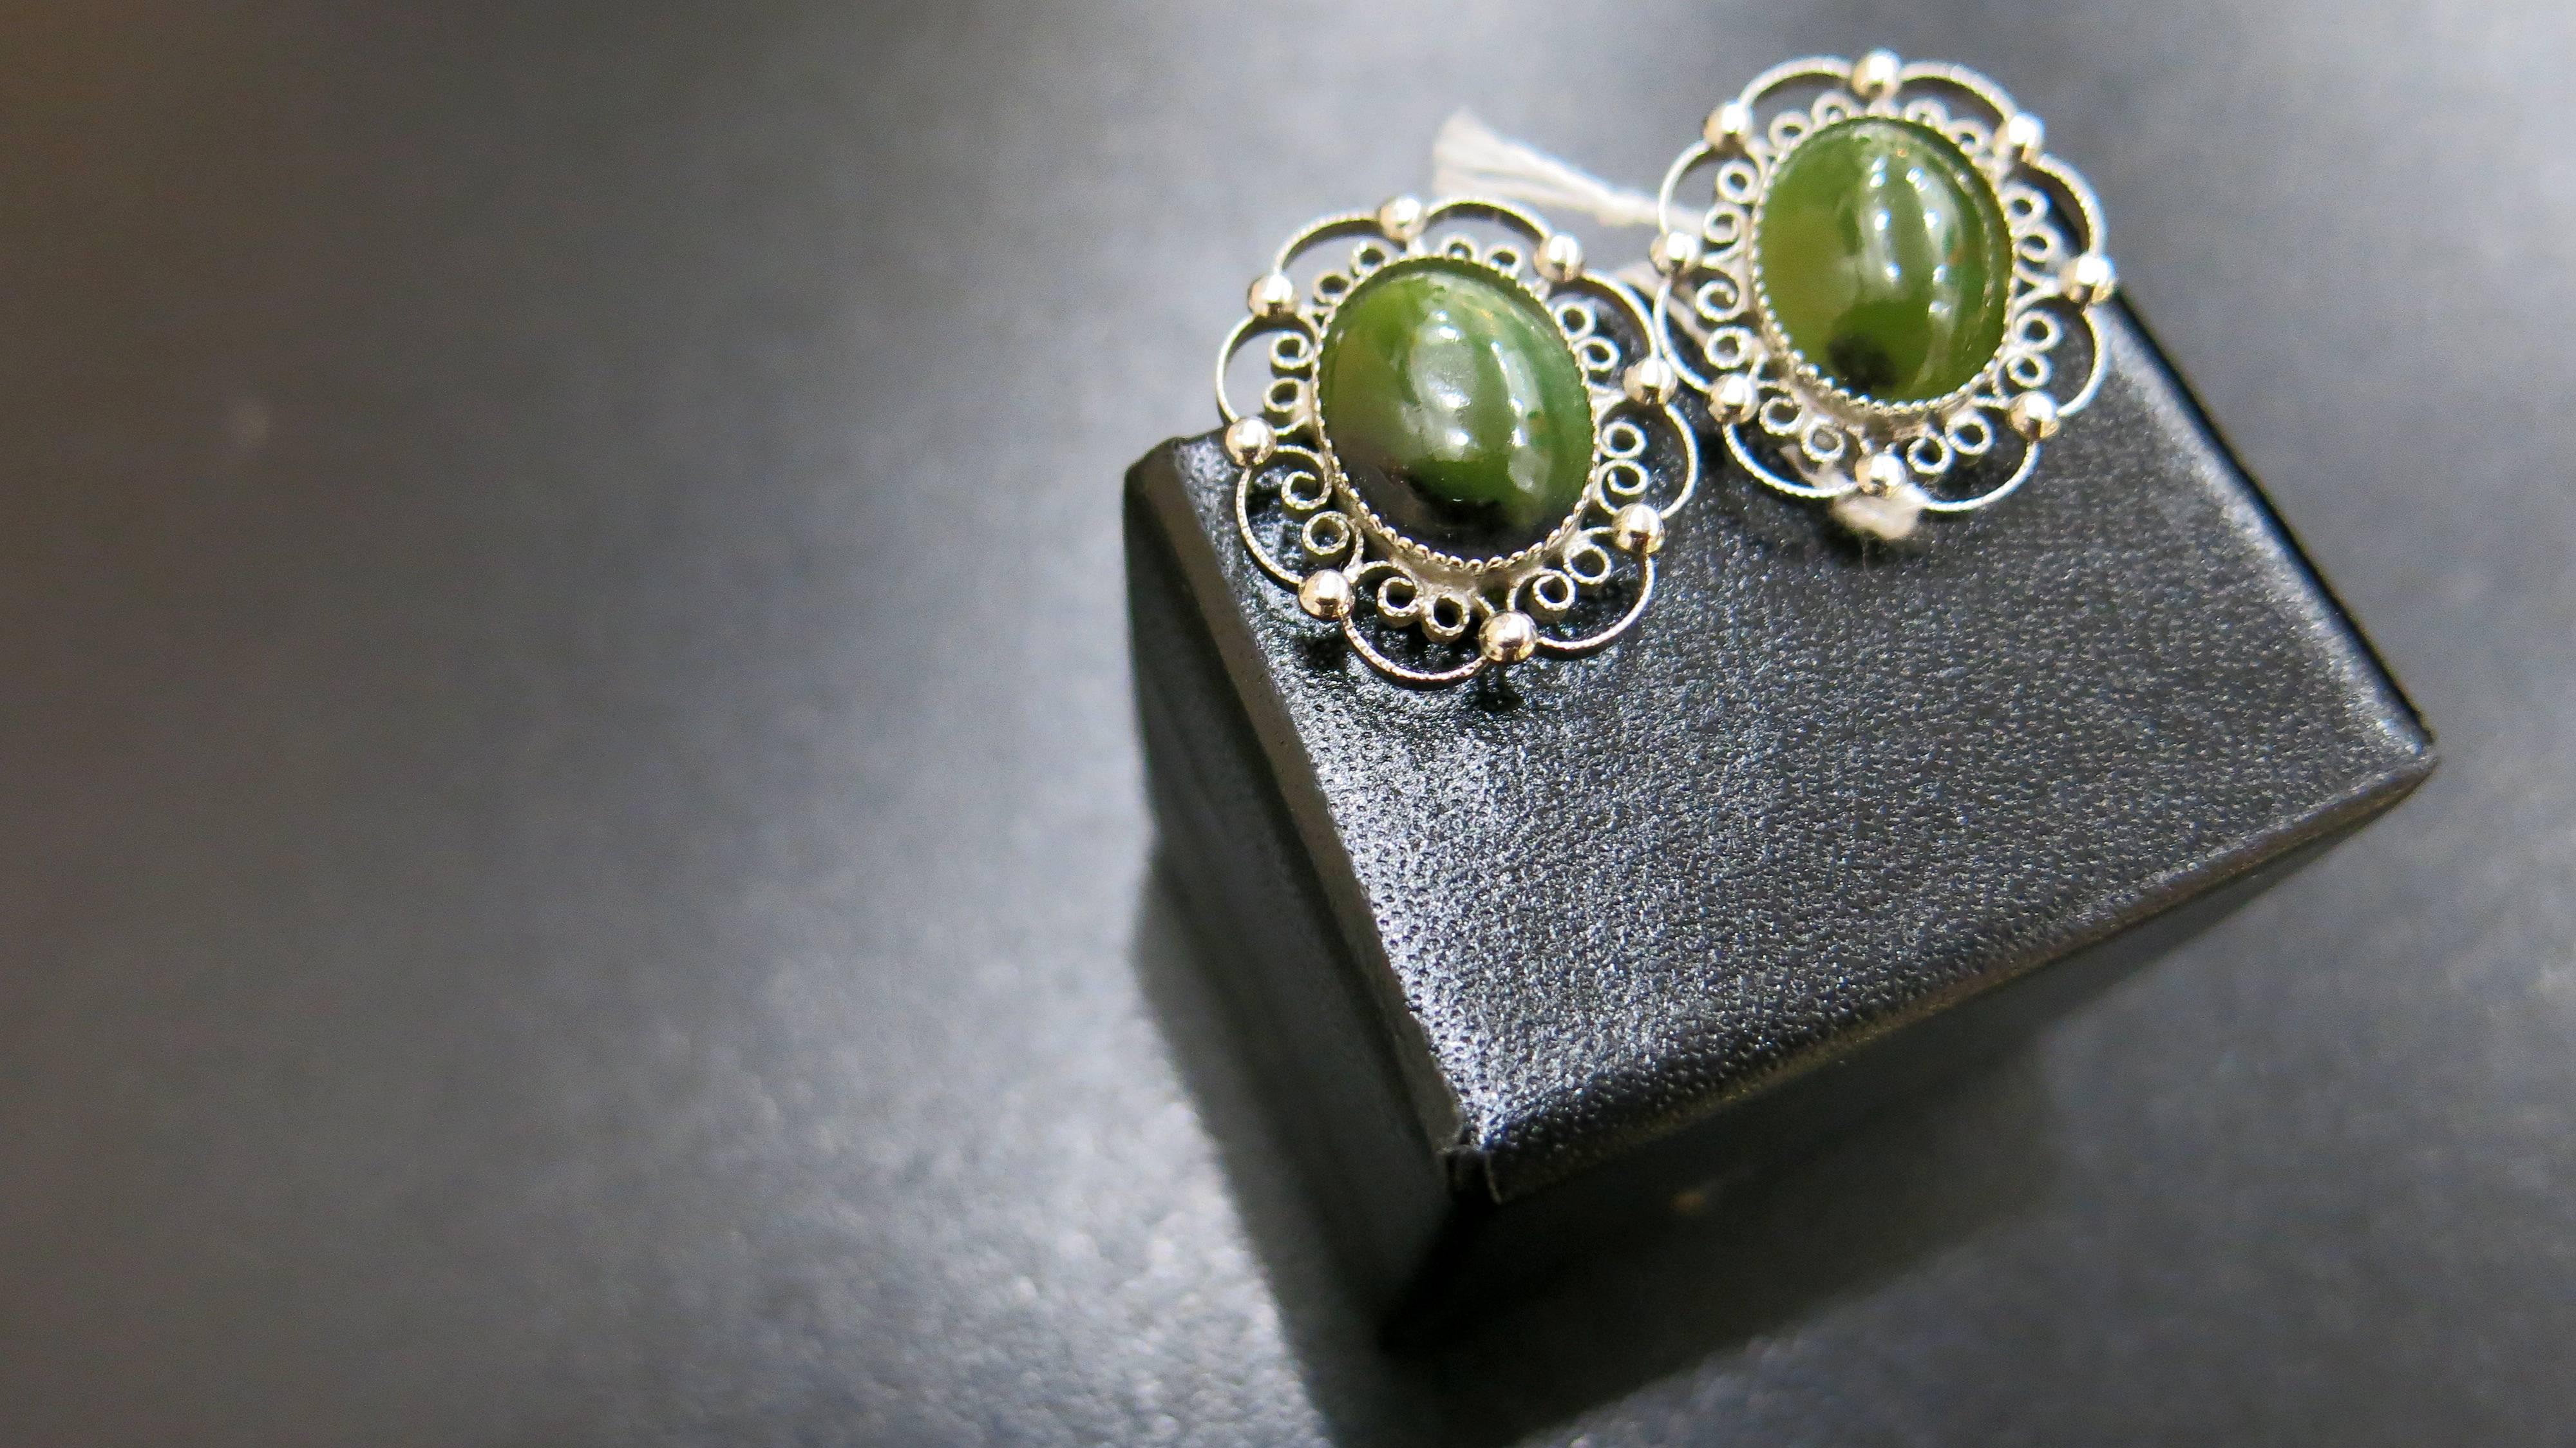 Oval sterling silver filigree clip on earrings with jade stone. Stamped Sorrento Sterling.

Slightly translucent green jade stones with a small amount of black at the top laid in a sterling silver lattice filagree.

The Vincent Sorrento Company